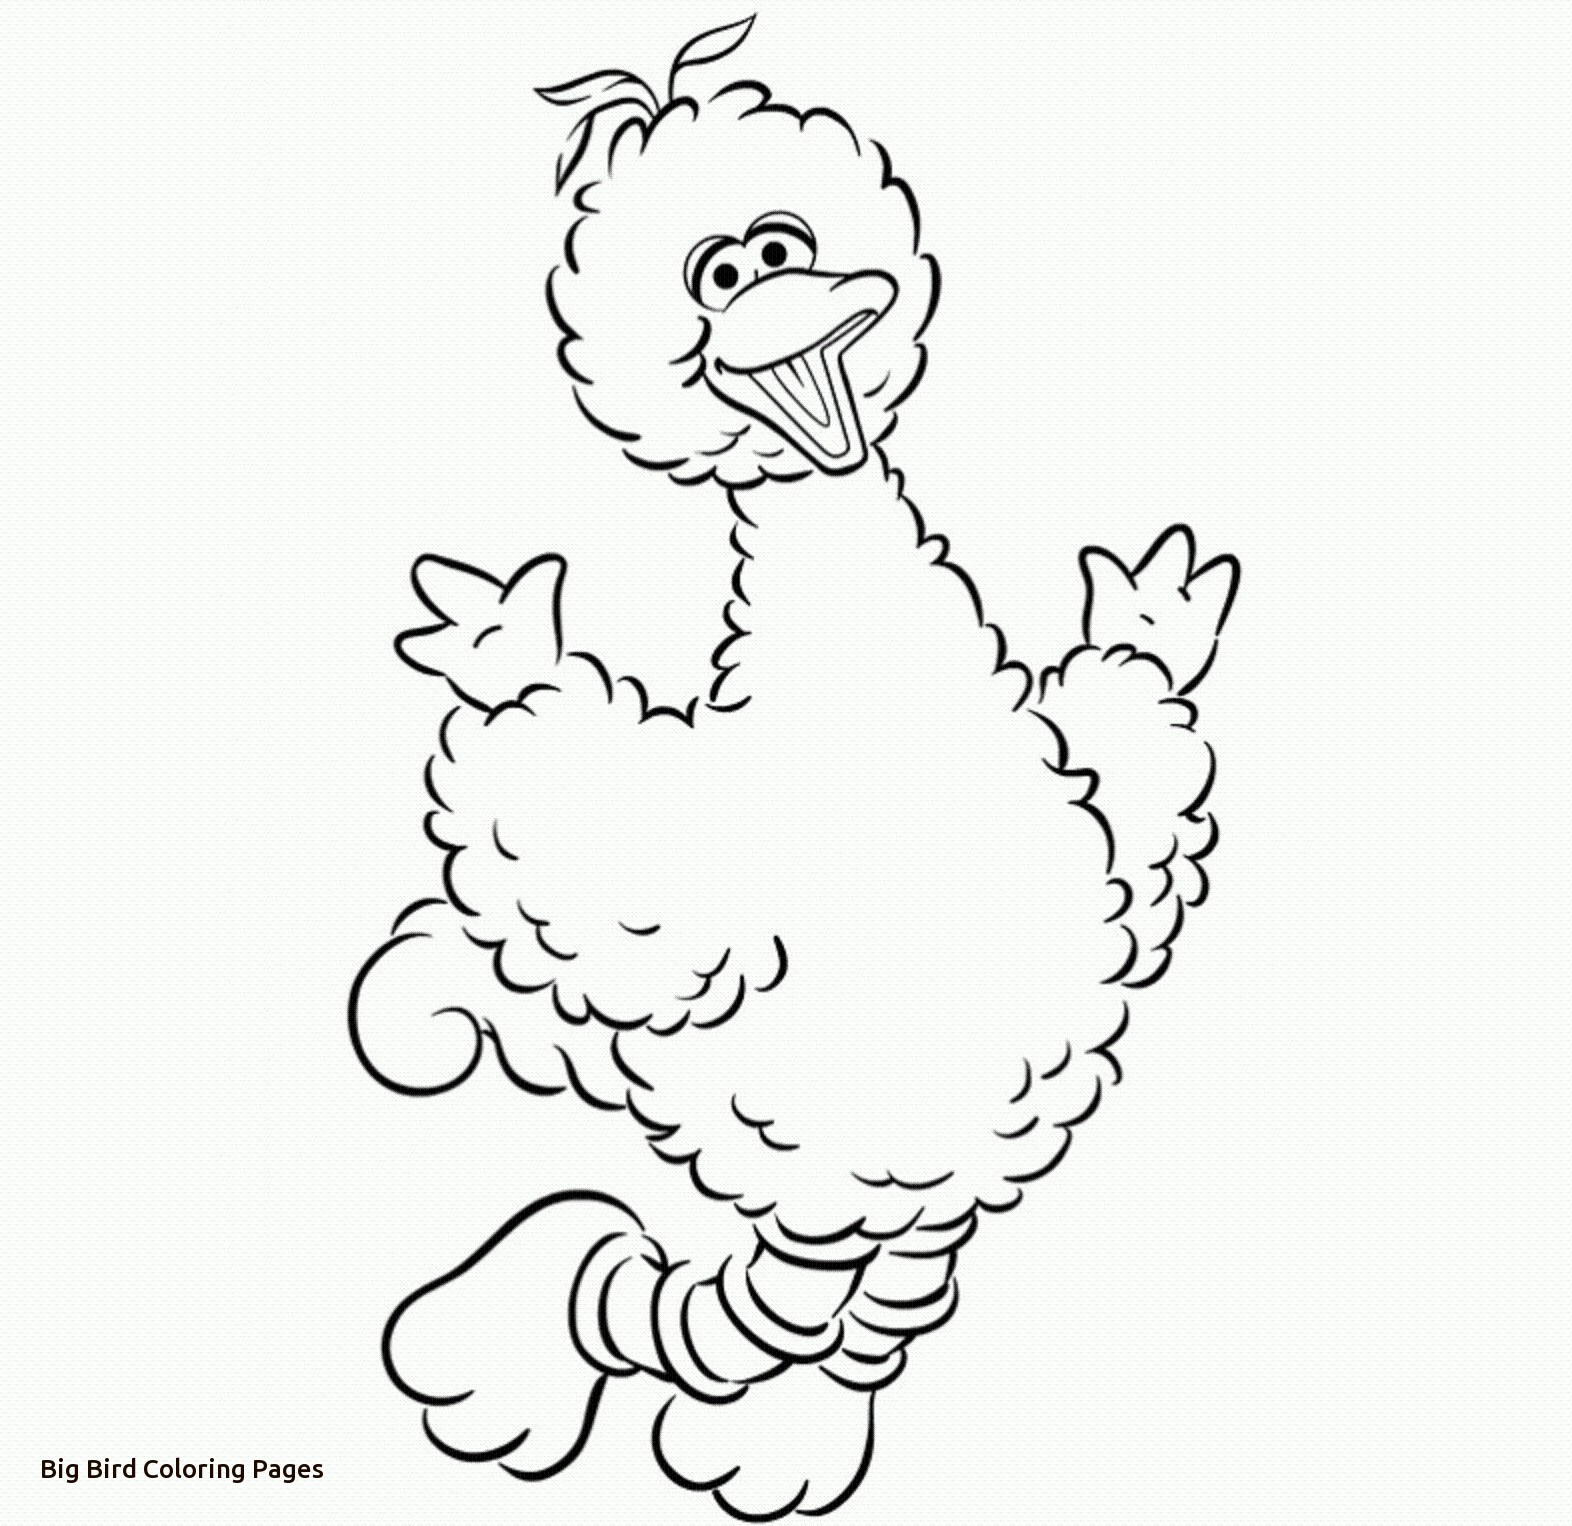 Big Bird Coloring Pages 2